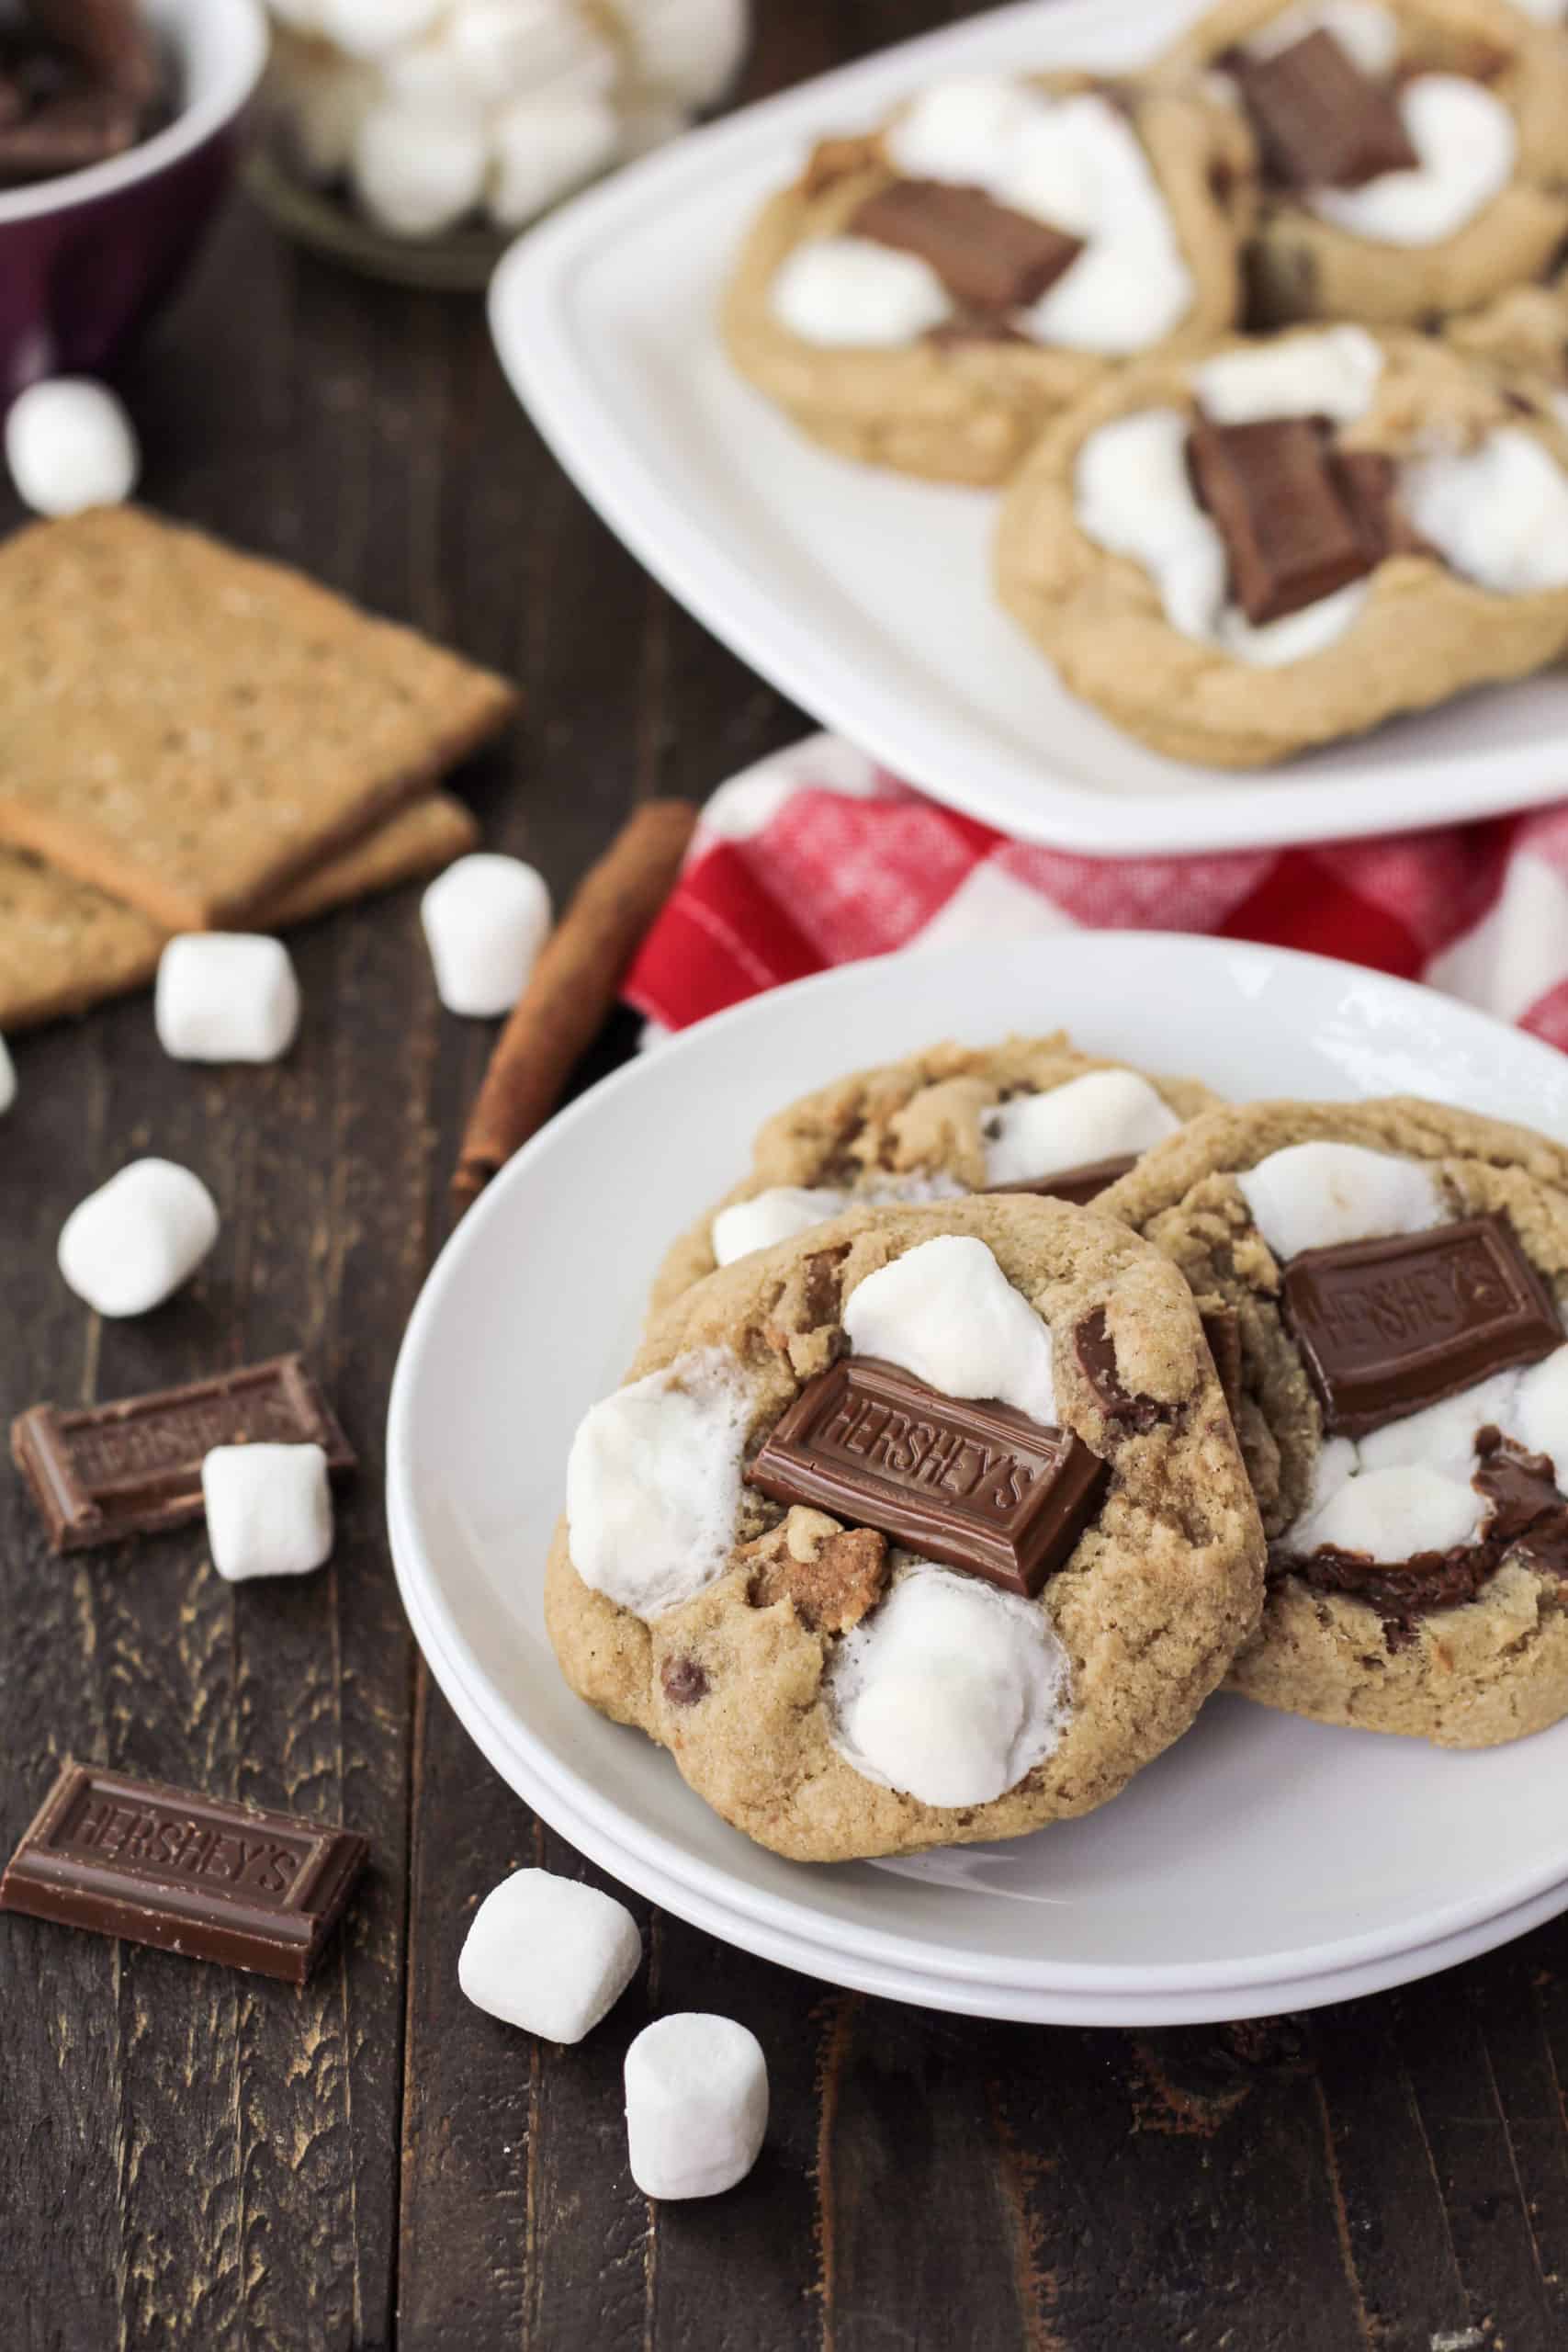 https://www.milehighmitts.com/wp-content/uploads/2021/07/smores-cookies-3-scaled.jpg